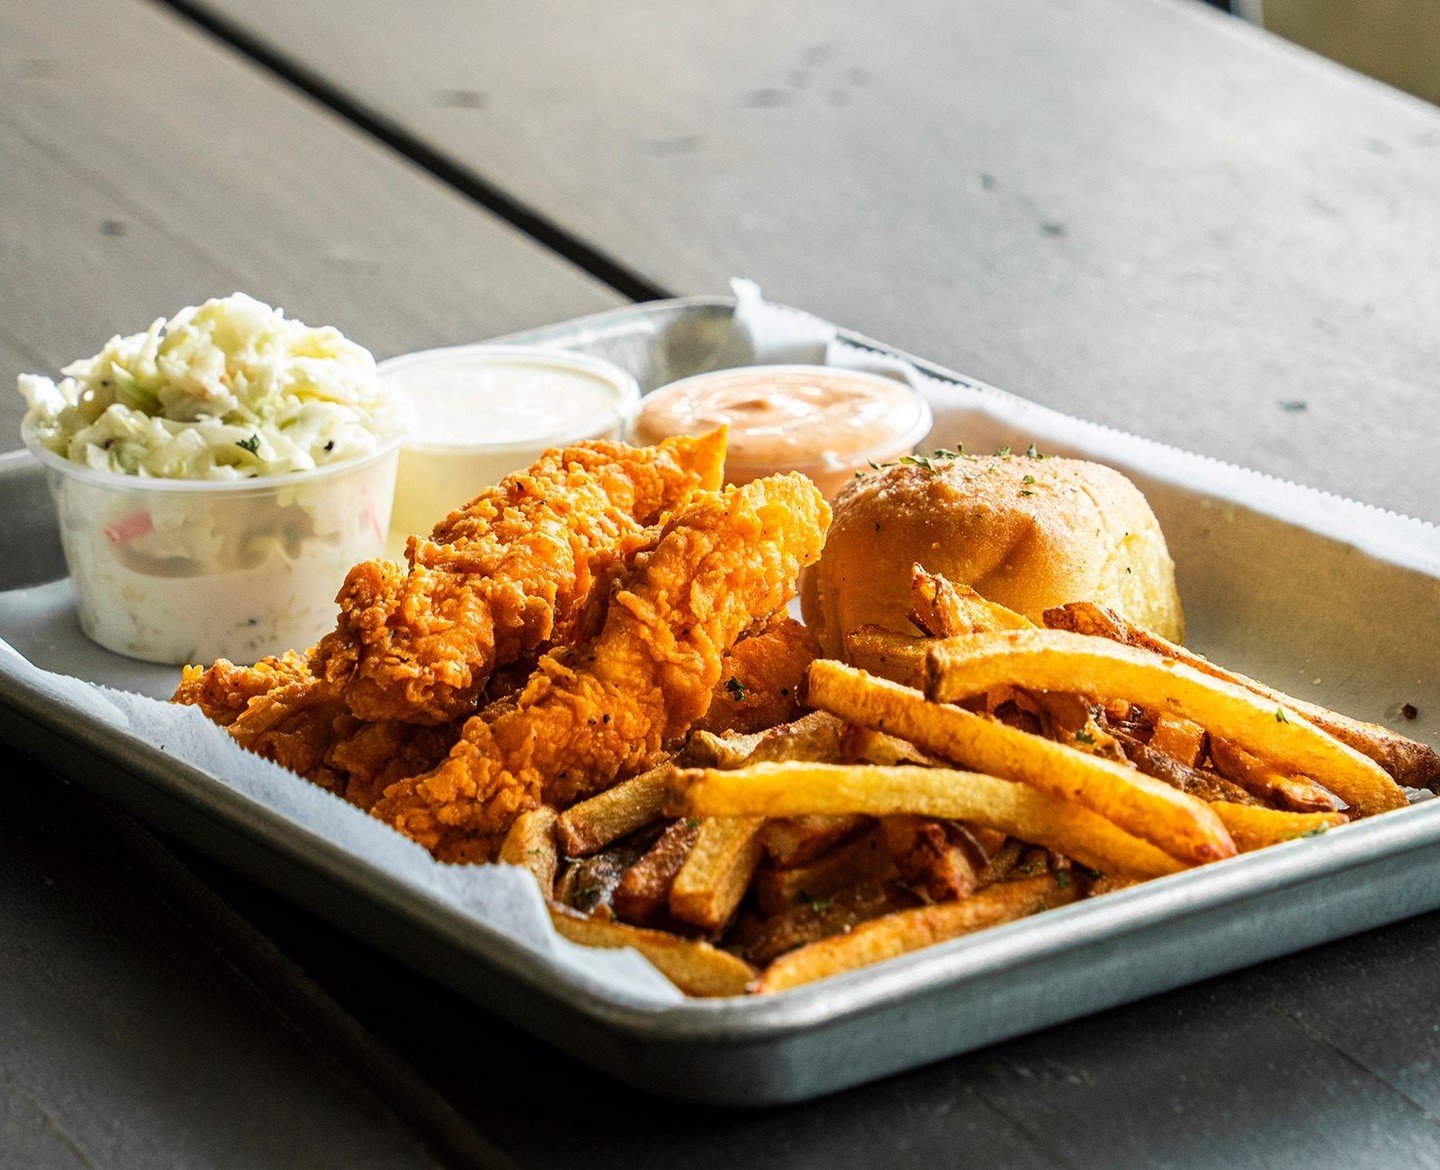 Simple, fresh and quality ingredients. A good chicken tender doesn't have to be complicated, but it does have to be crunchy and juicy. 

.

.

.

#JustChicken #TenderLover #chickentenders #tenders #614living #614eats #614foodie #foodie #FoodForThough